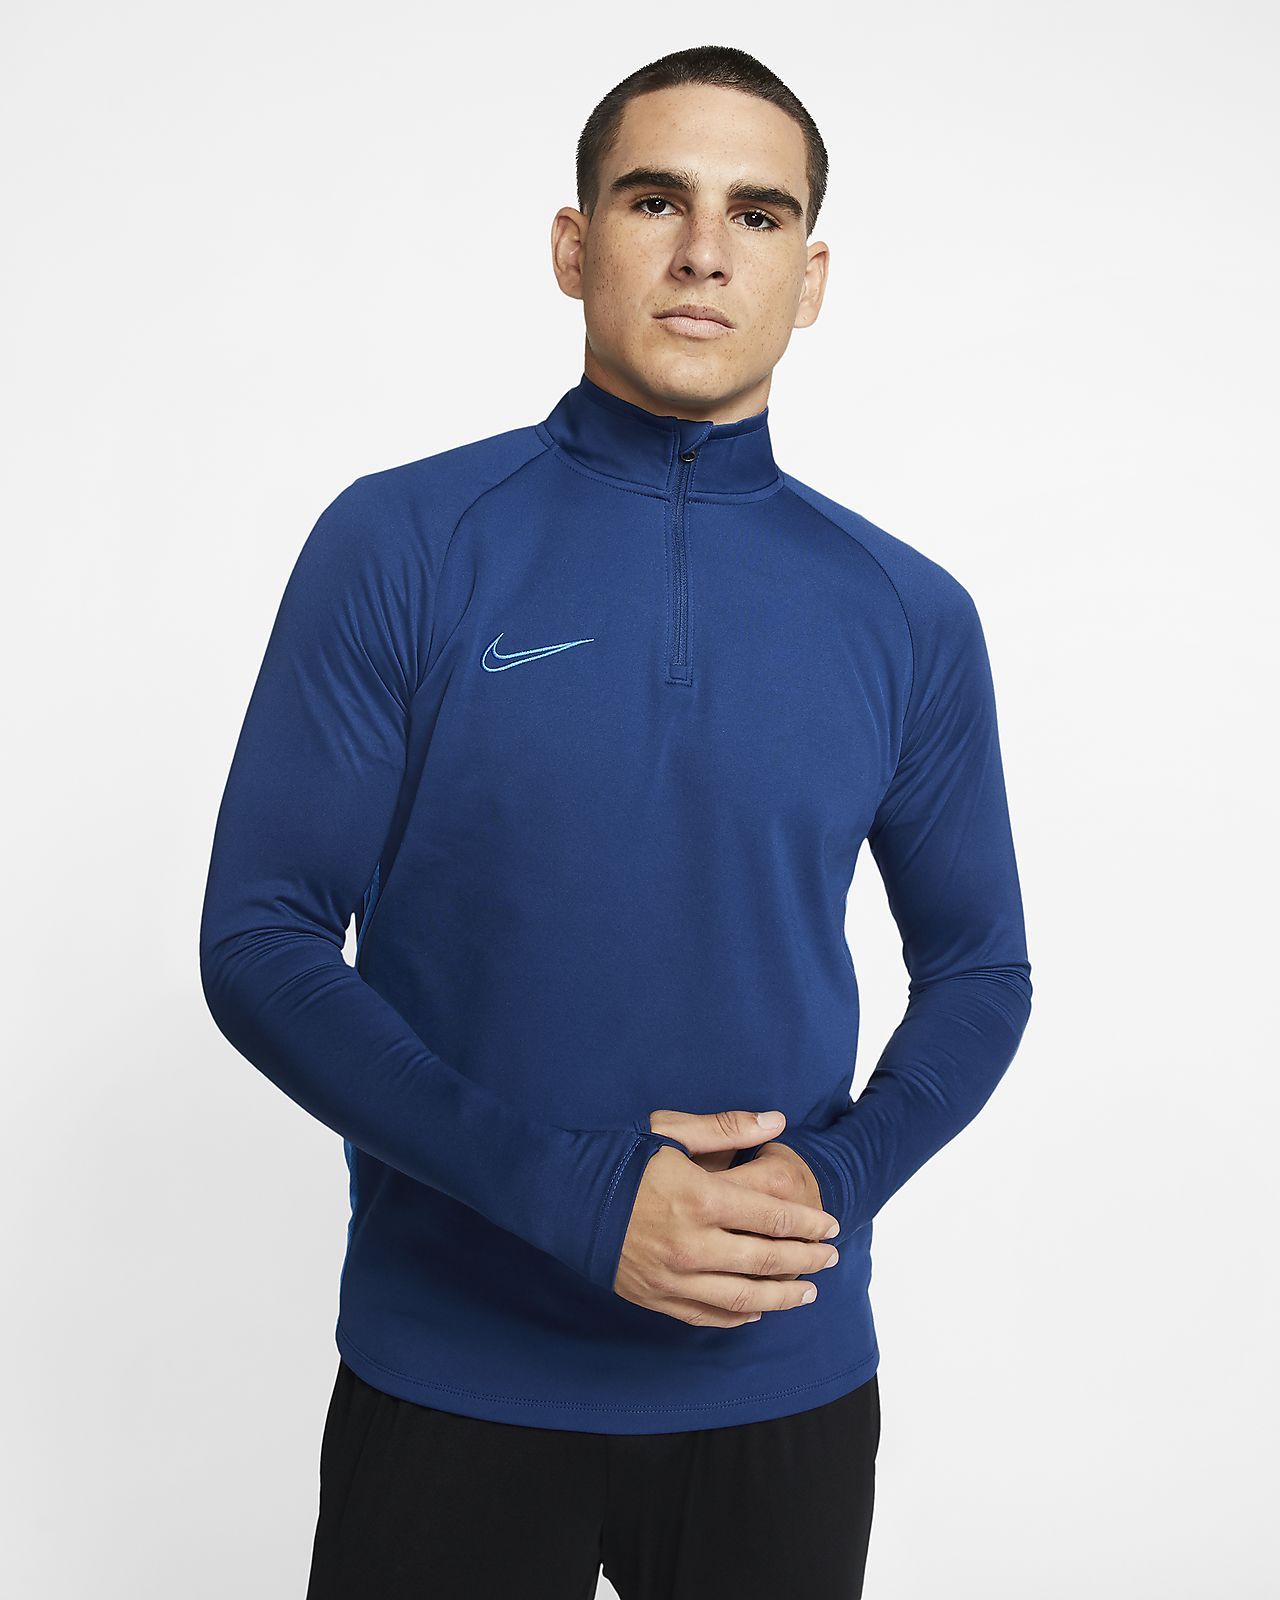 nike academy drill top blue